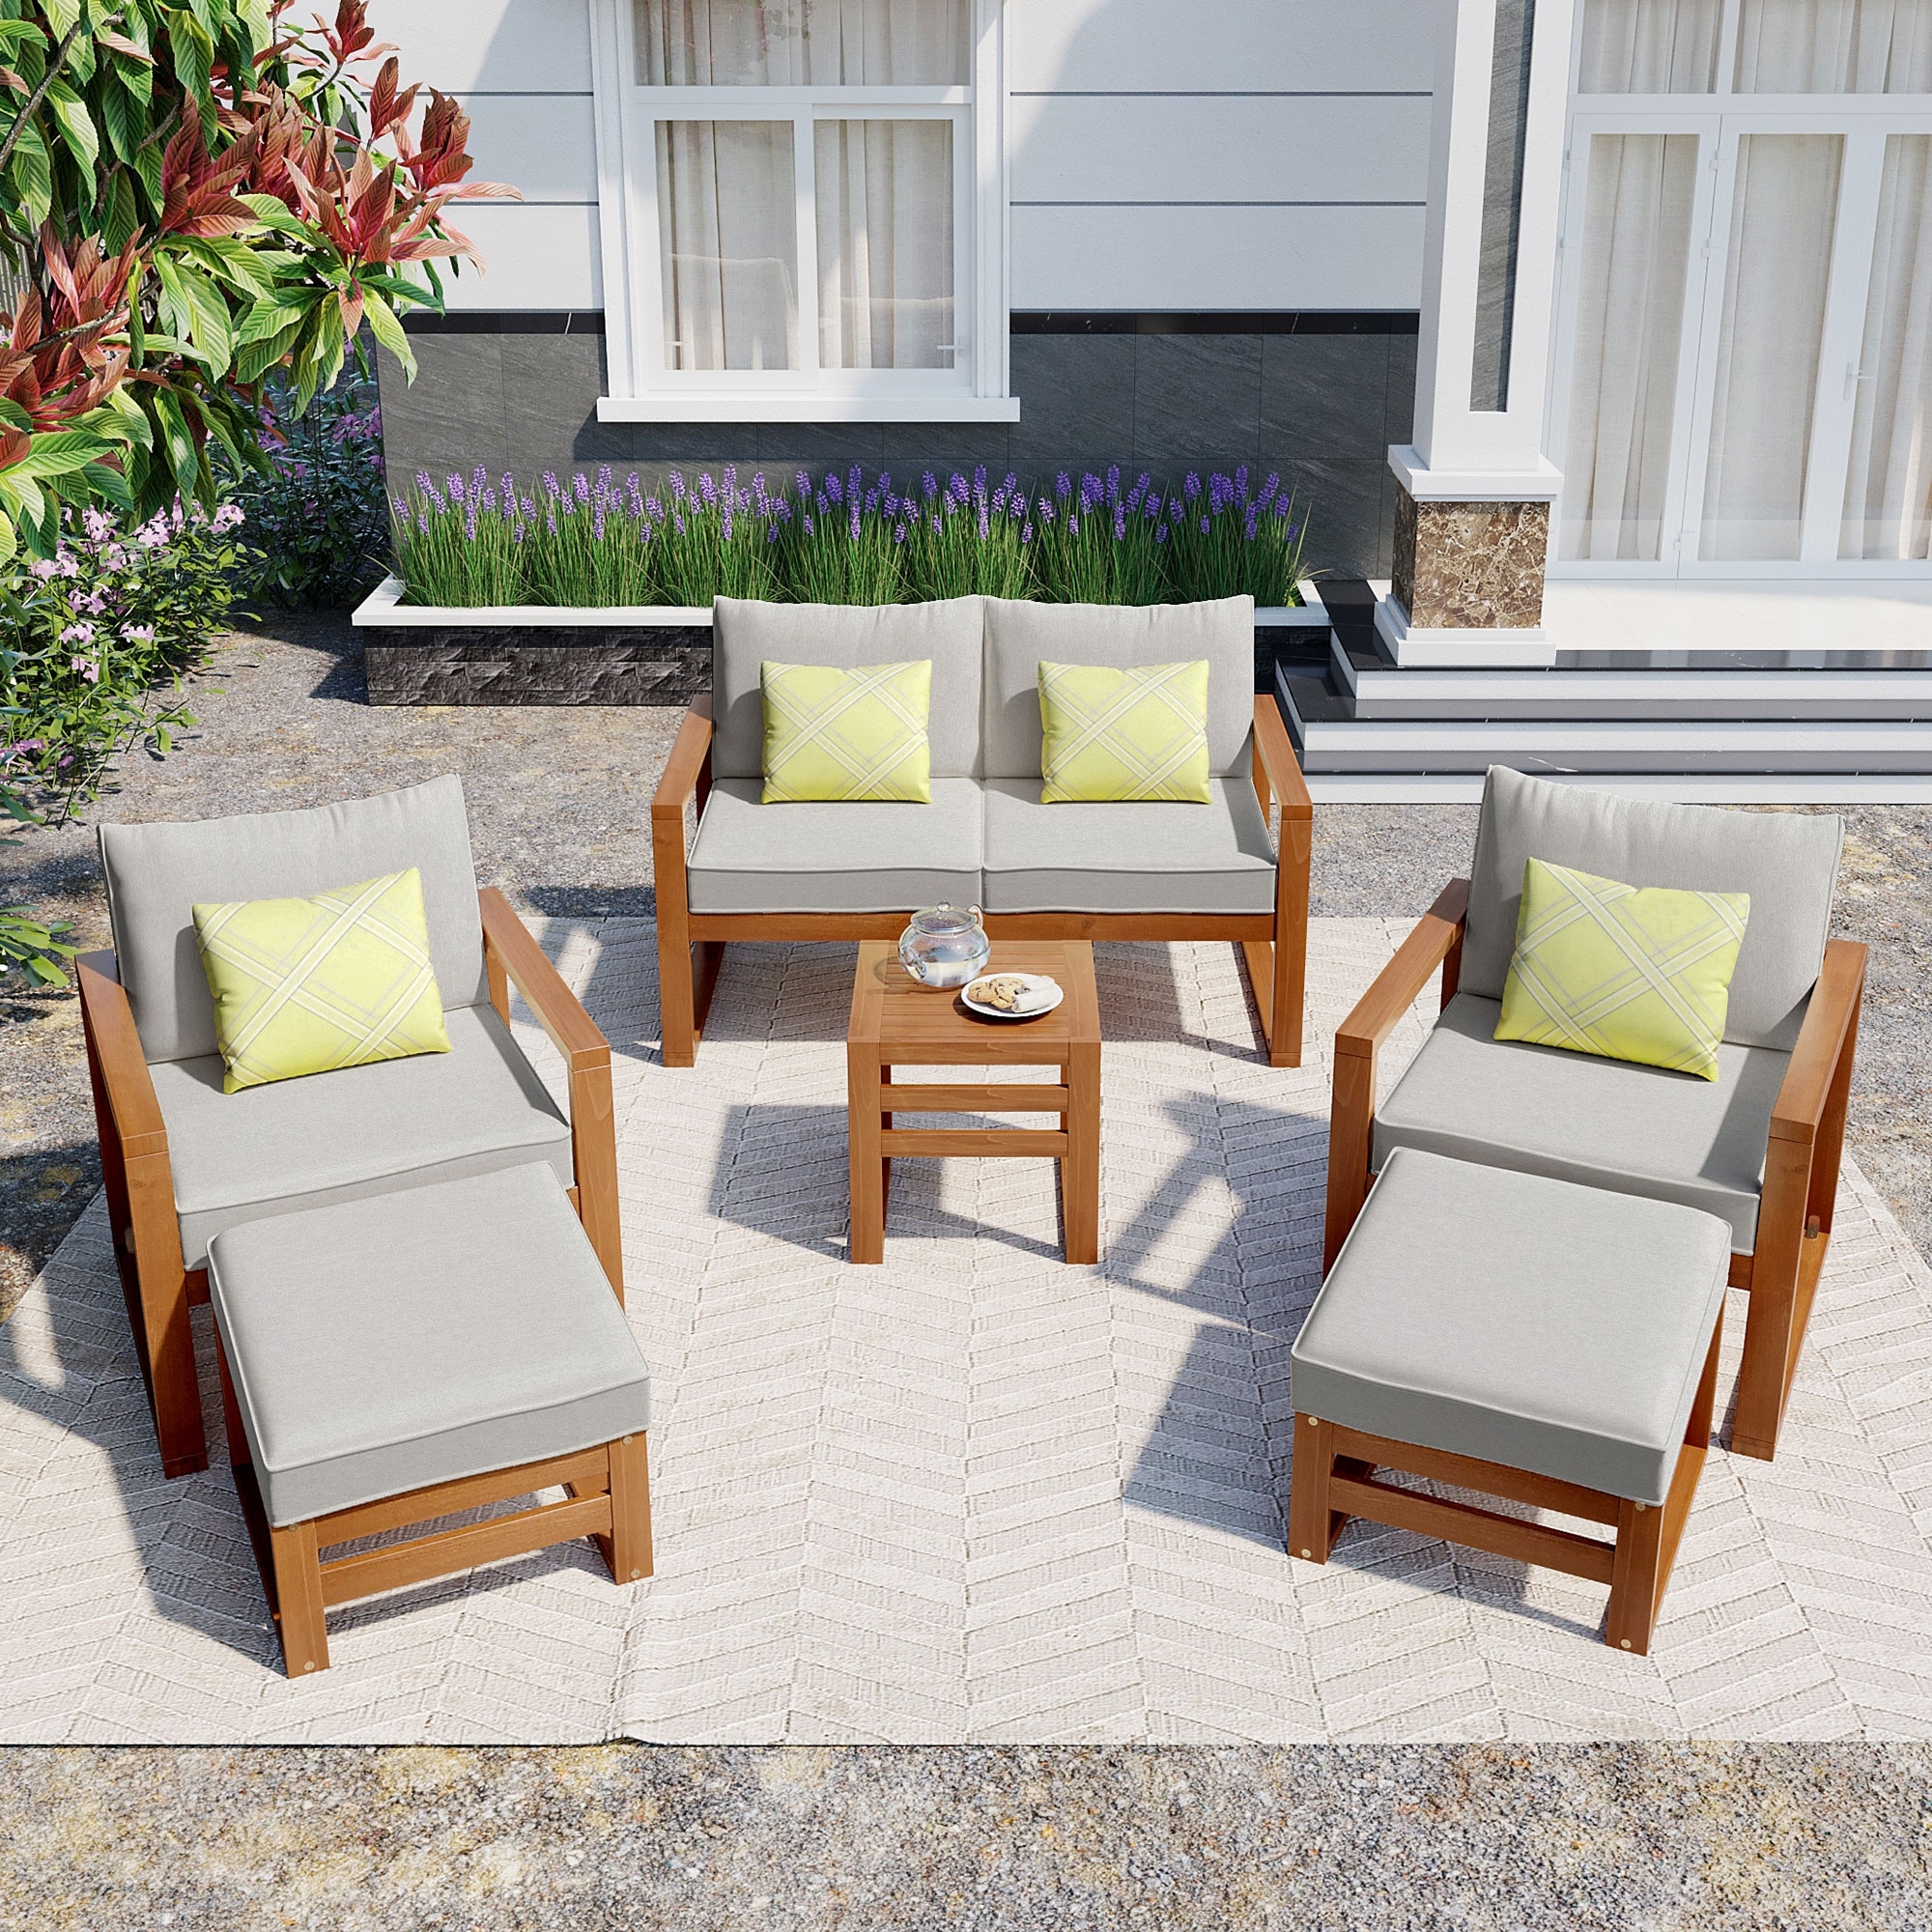 6-piece Outdoor Patio Acacia Wood Conversation Set  Sectional Garden Seating Groups Chat Set With Cushion And 4 Throw Pillows